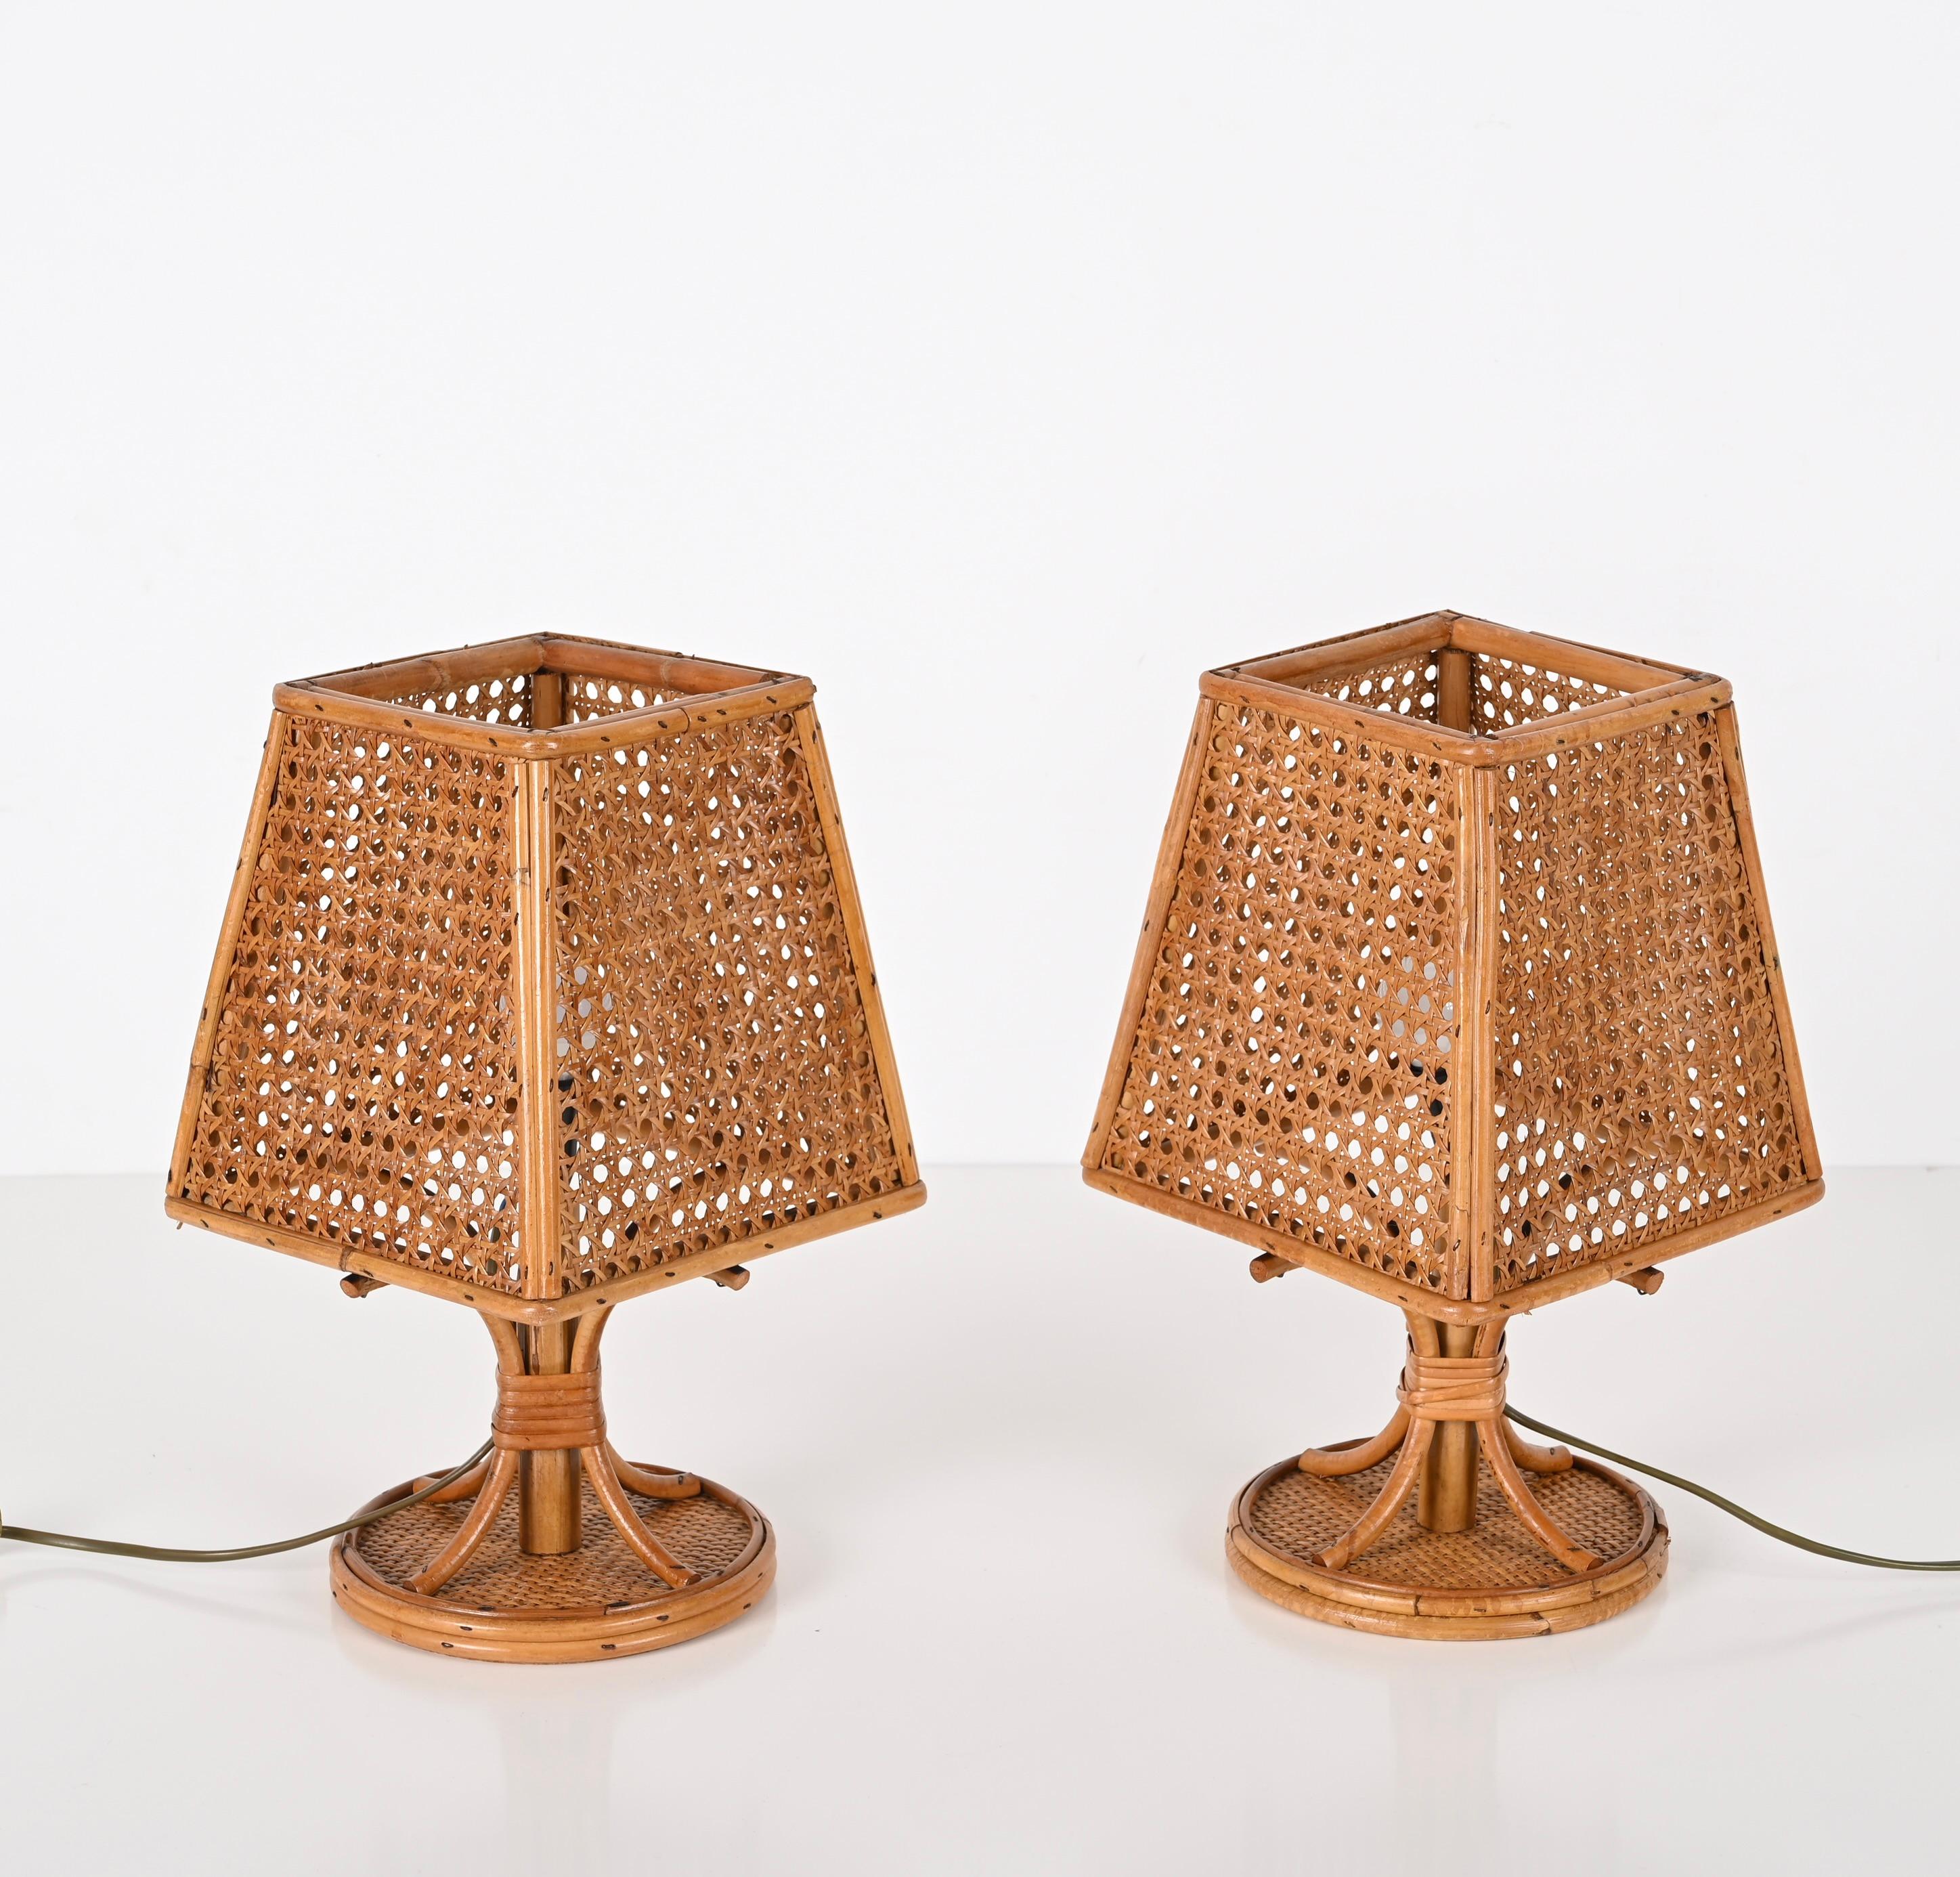 Marvellous pair of midcentury wicker and rattan table lamps. These fantastic pieces were designed and made in Italy in the 1960s.

By having a wicker and Vienna straw lampshade, the light diffusion is incredibly warm and charming. This piece